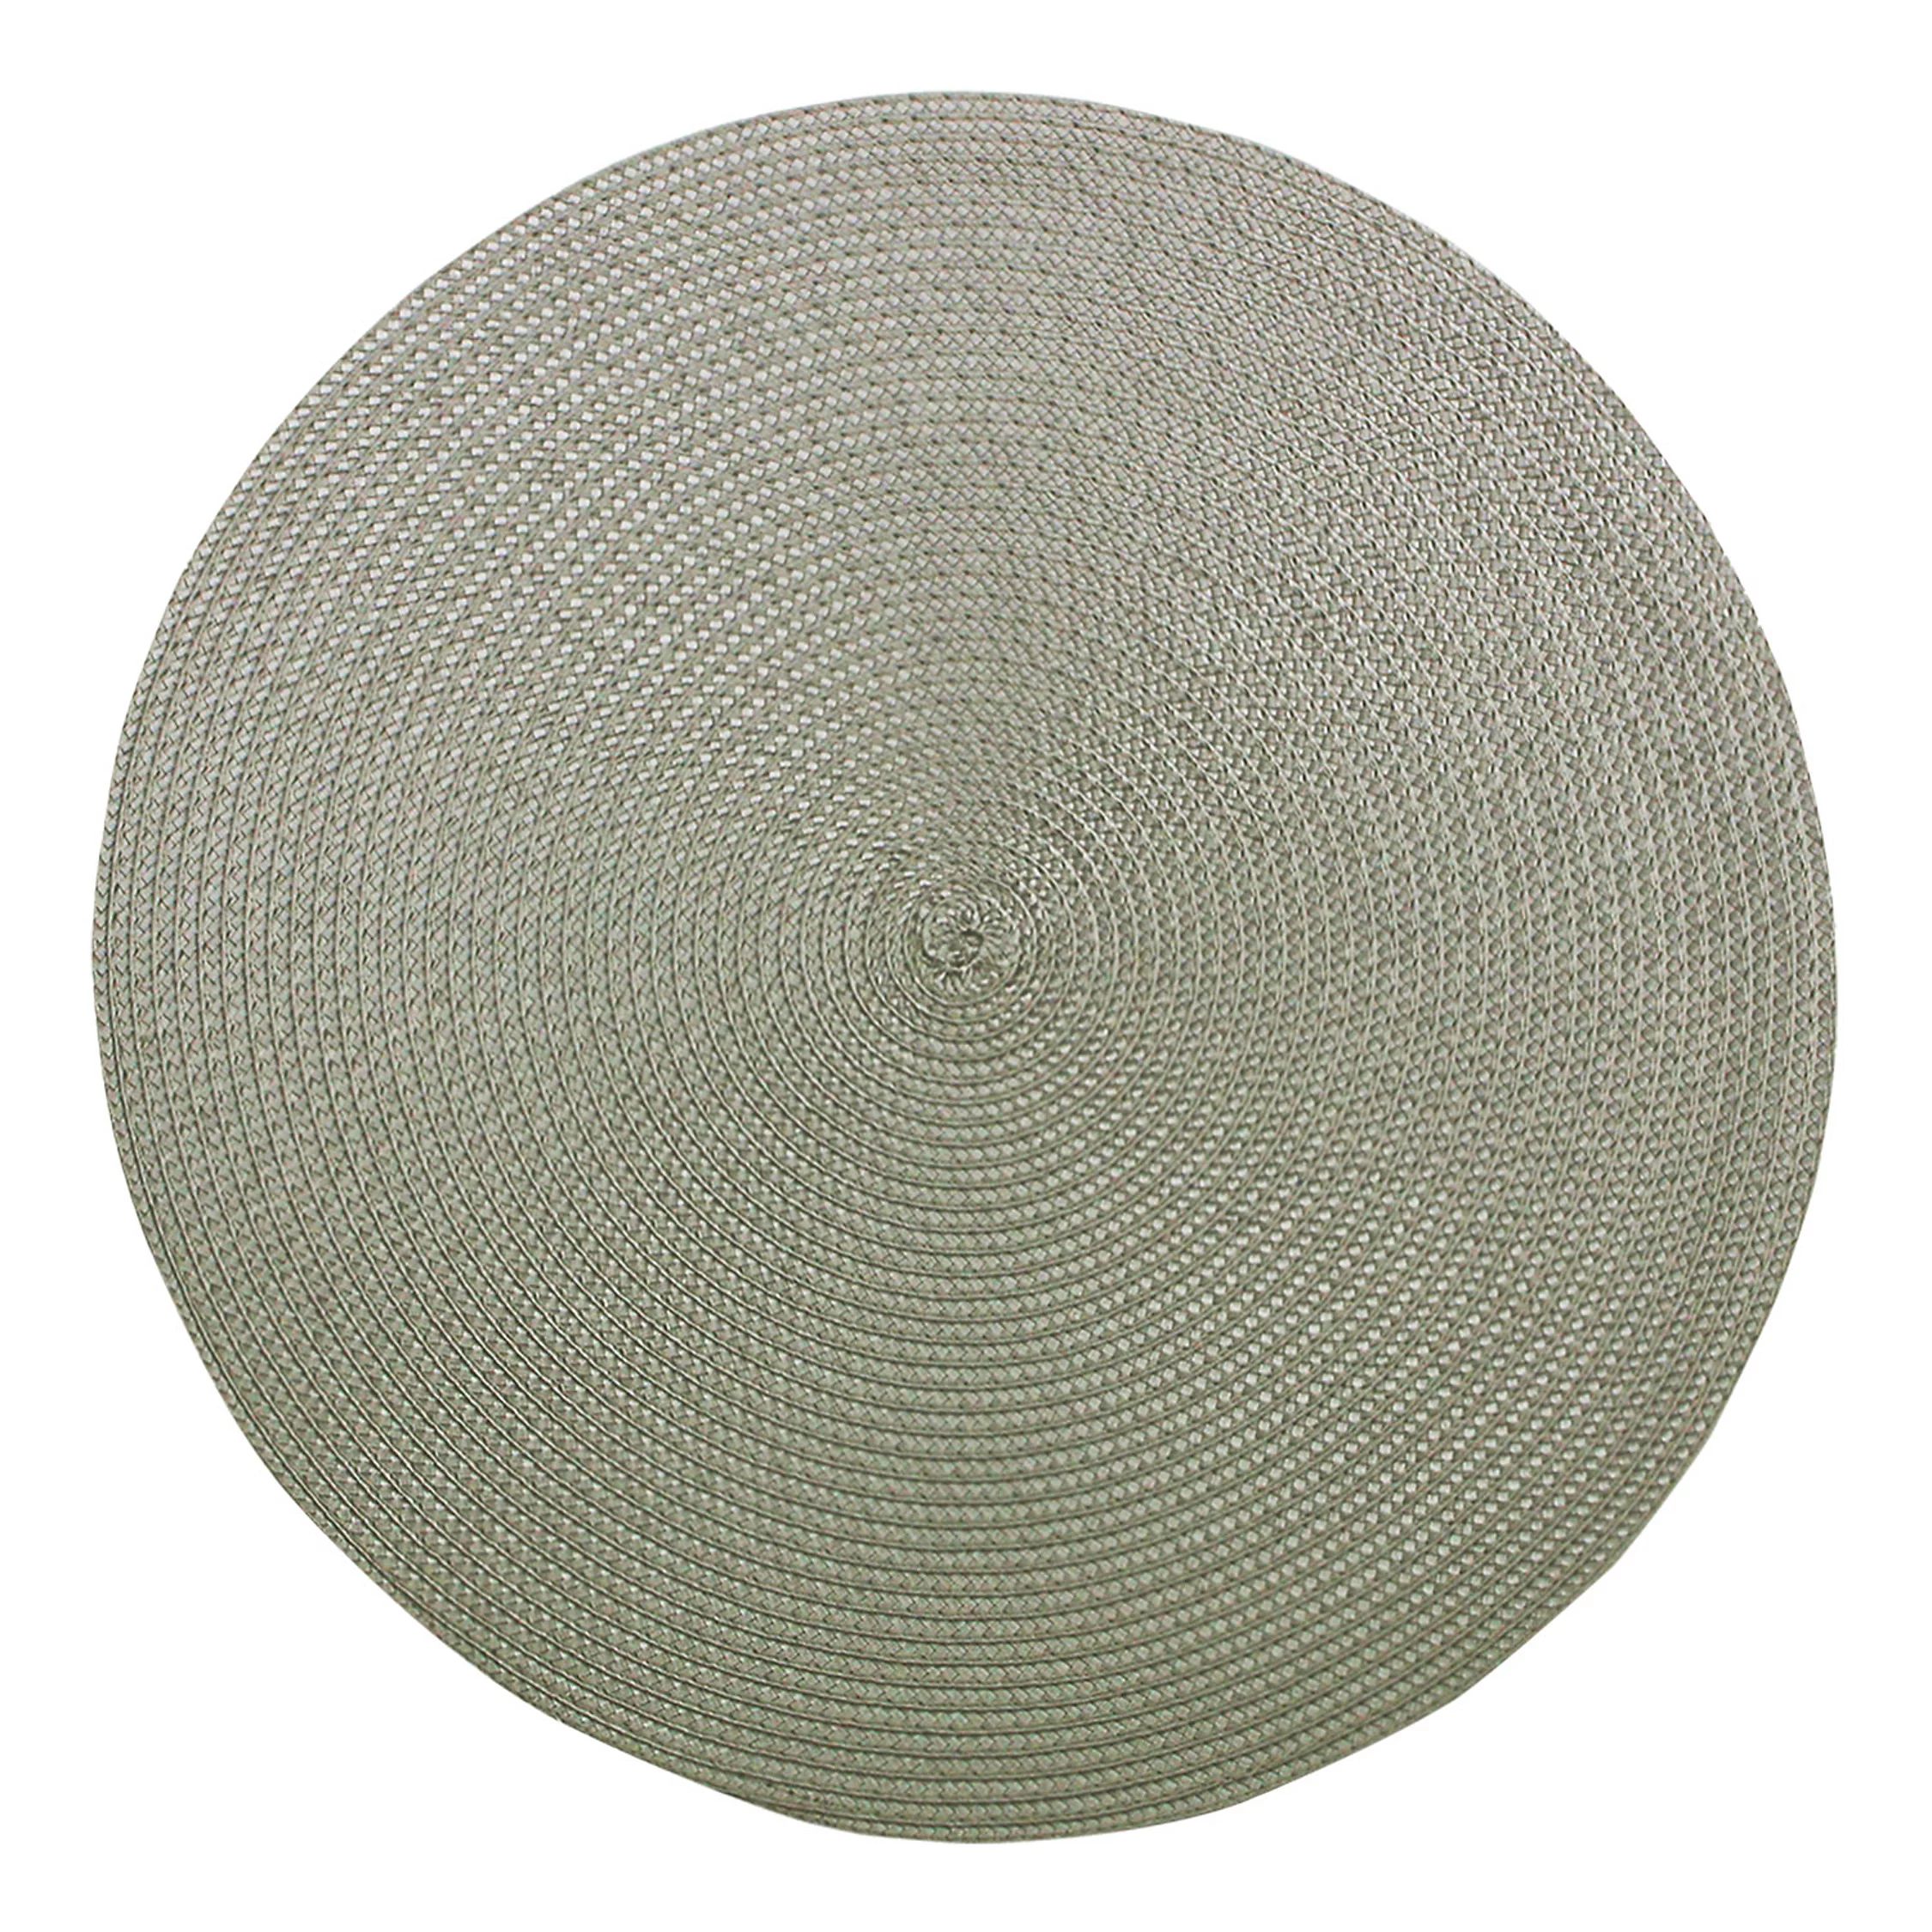 Food Network™ Solid Round Placemat | Kohl's